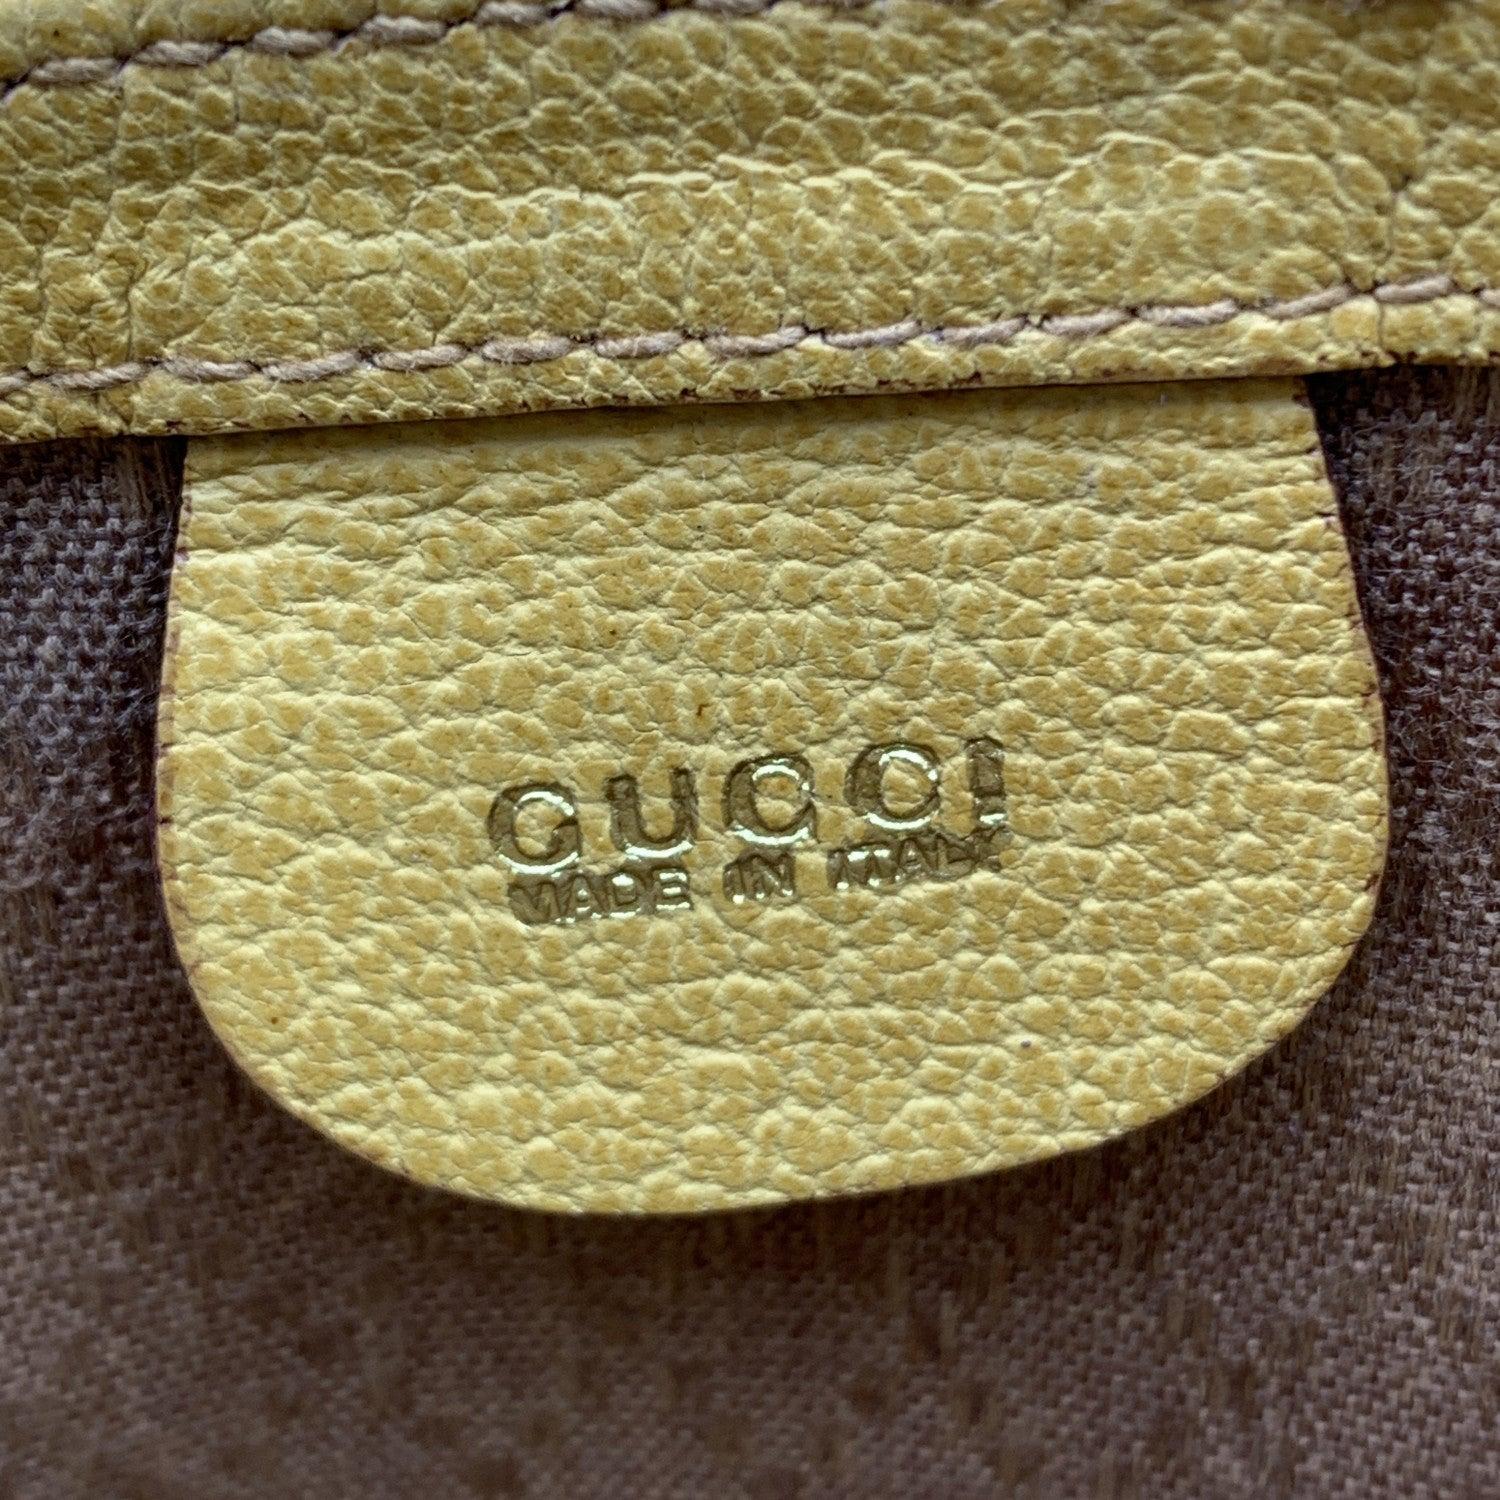 Gucci Vintage Yellow Leather Suede Saddle Convertible Belt Bag 1